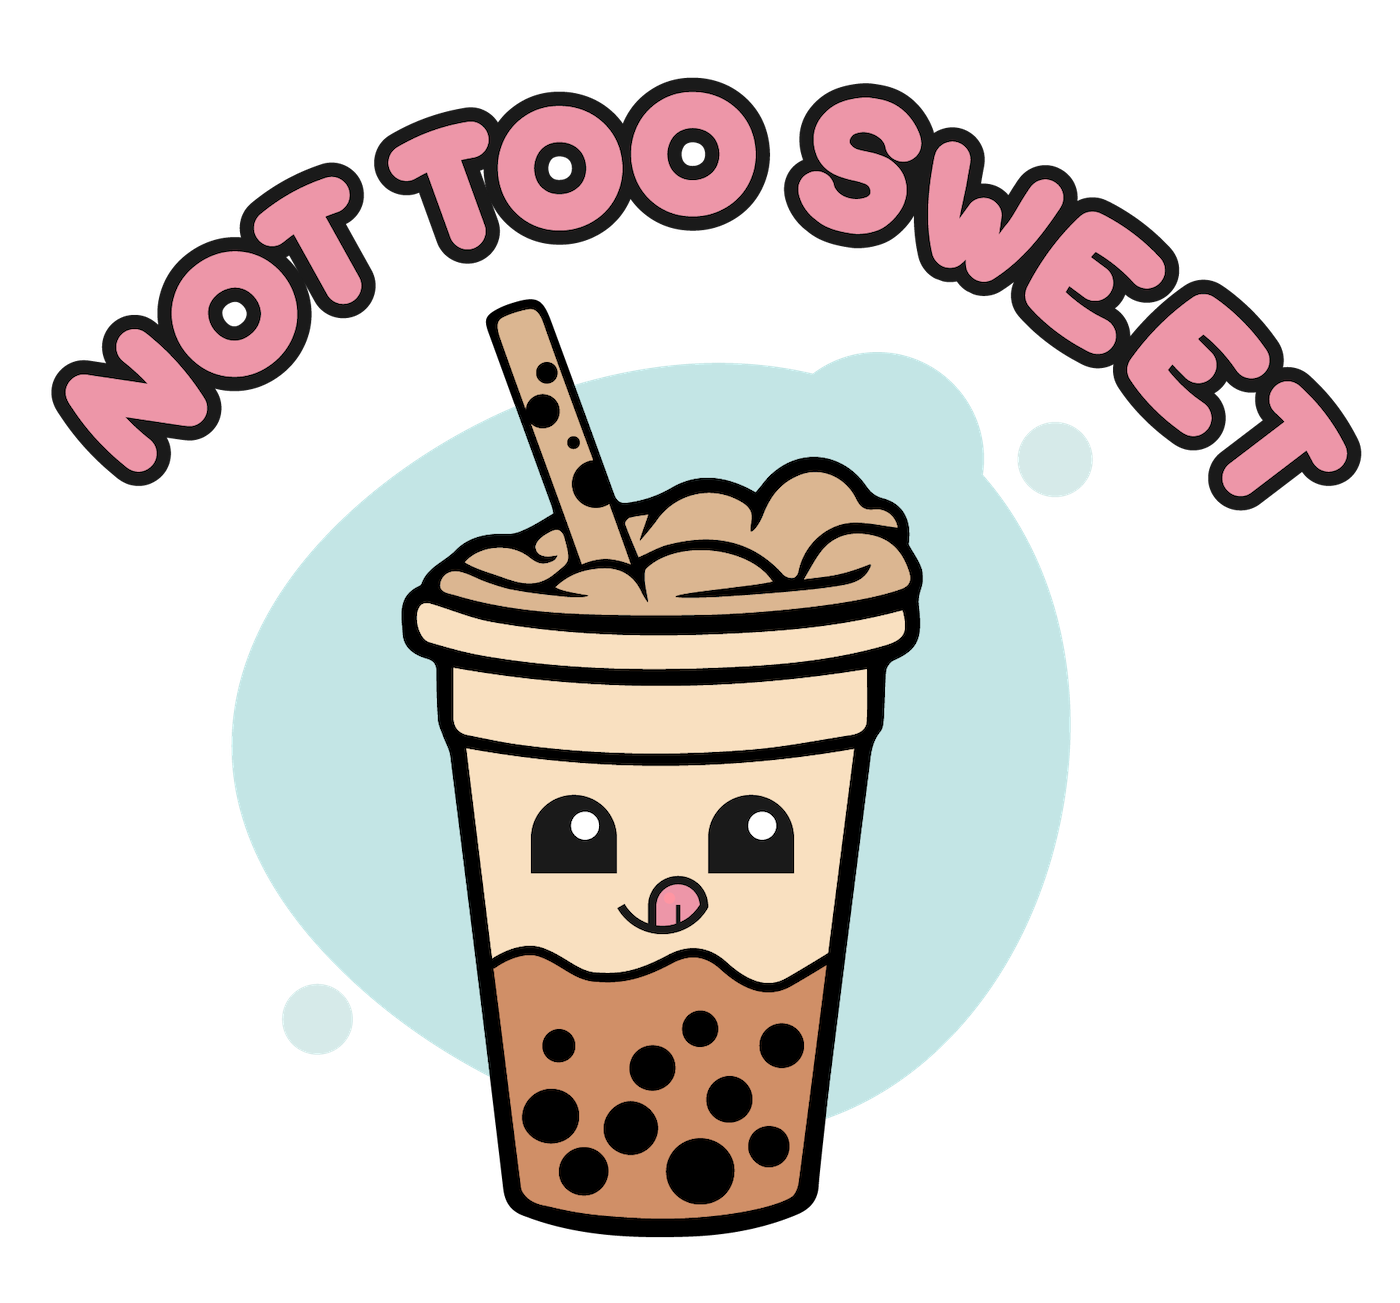 The Highest Accolade Among Asians for Desserts: “Not Too Sweet”